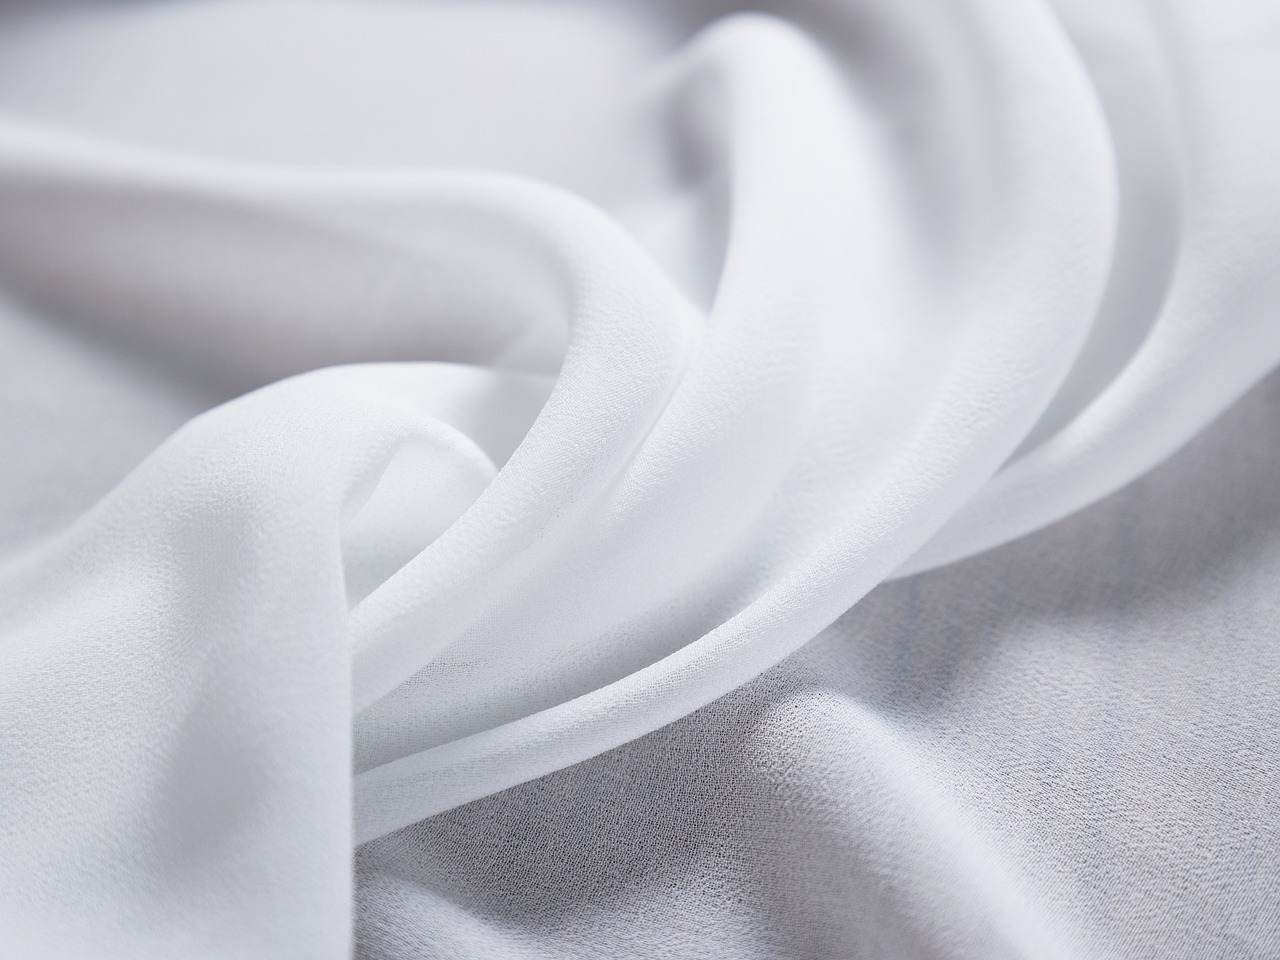 A close up image of a white fabric.